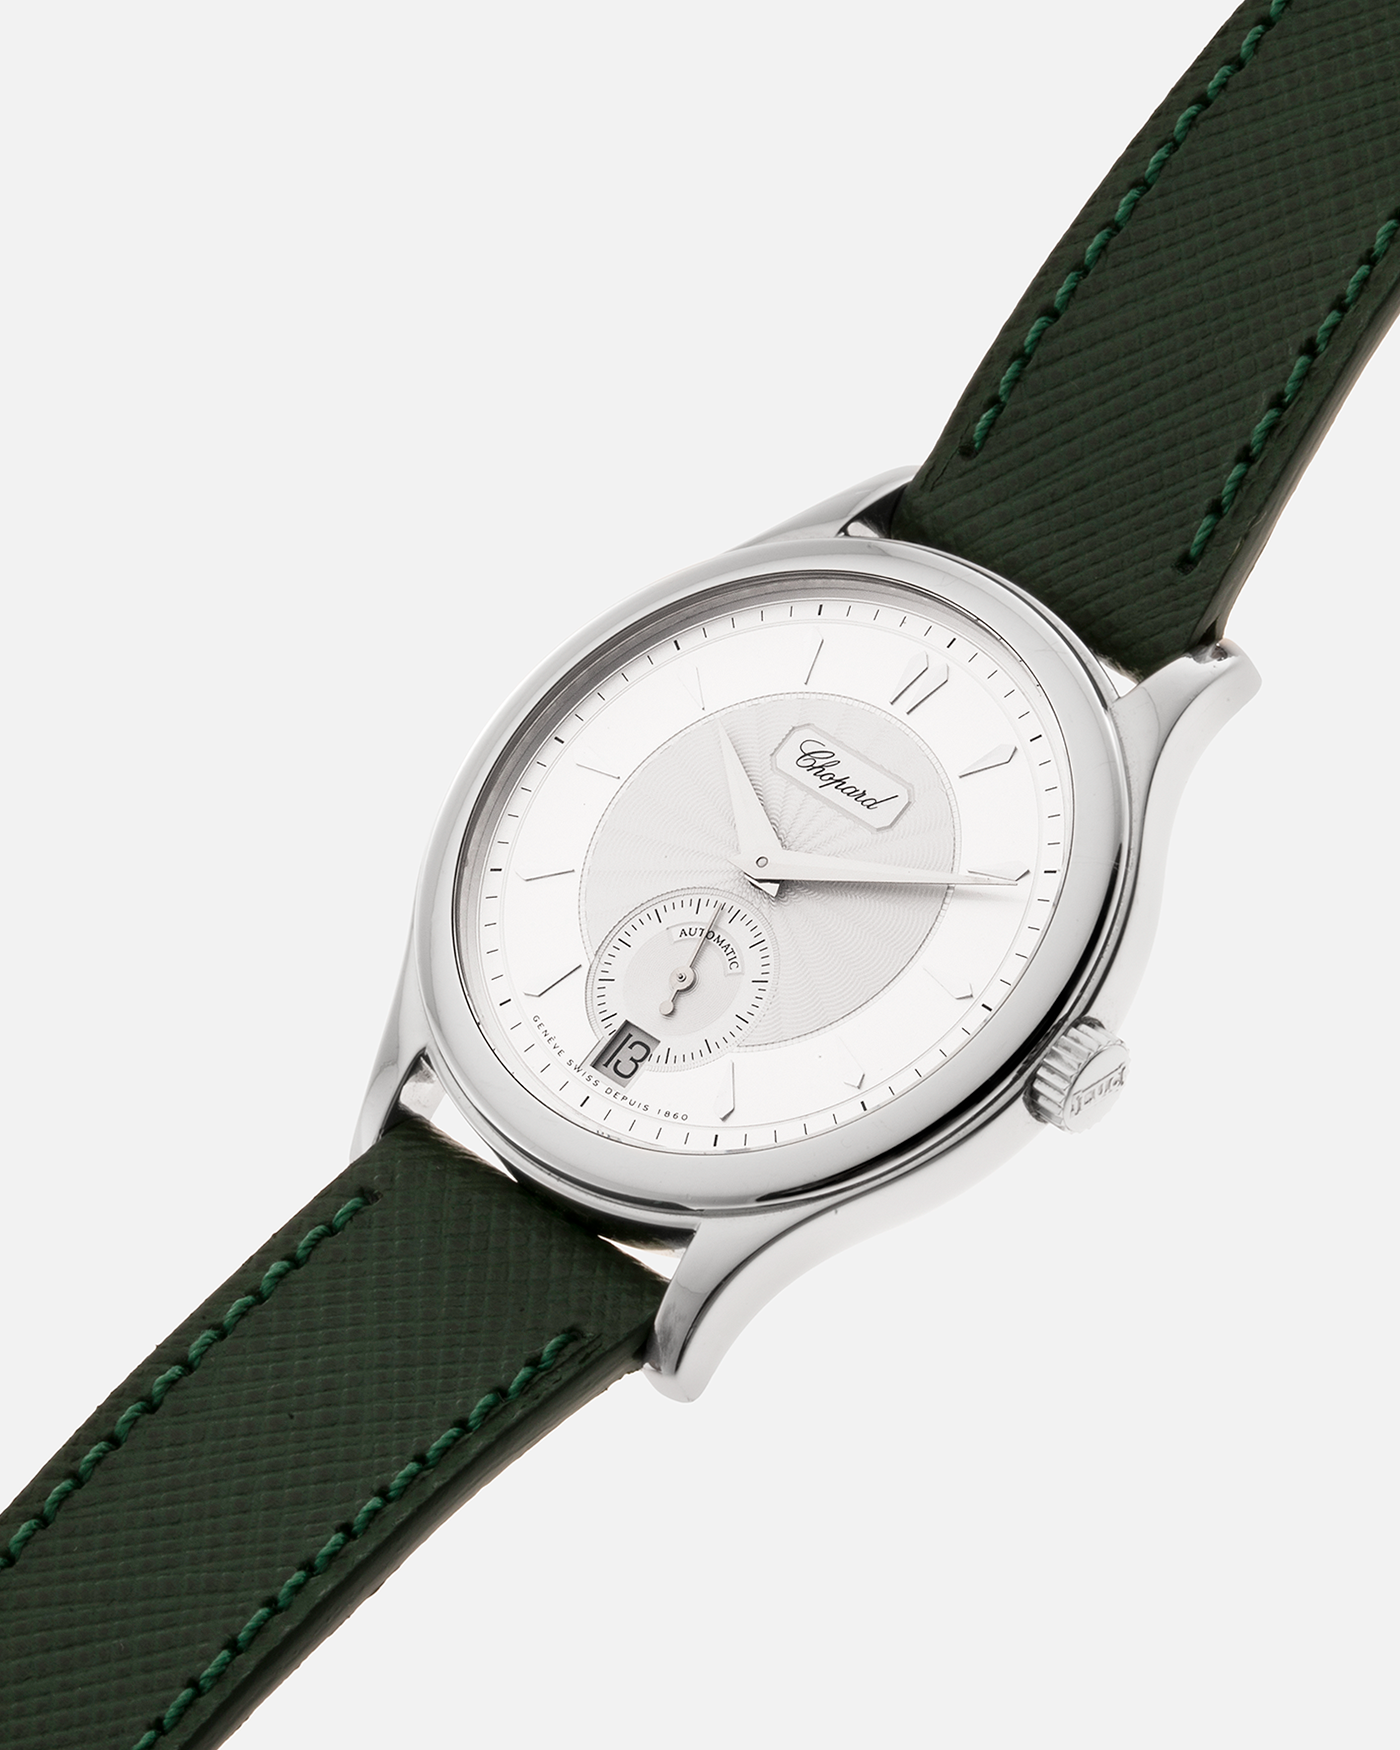 Brand: Chopard L.U.C. Year: 1990’s Model: 16/1860/2 Material: 18k White Gold Movement: In-House Caliber 1.96 Case Diameter: 37mm Strap: Hunter Green Molequin Textured Calf and 18k White Gold Chopard Tang Buckle